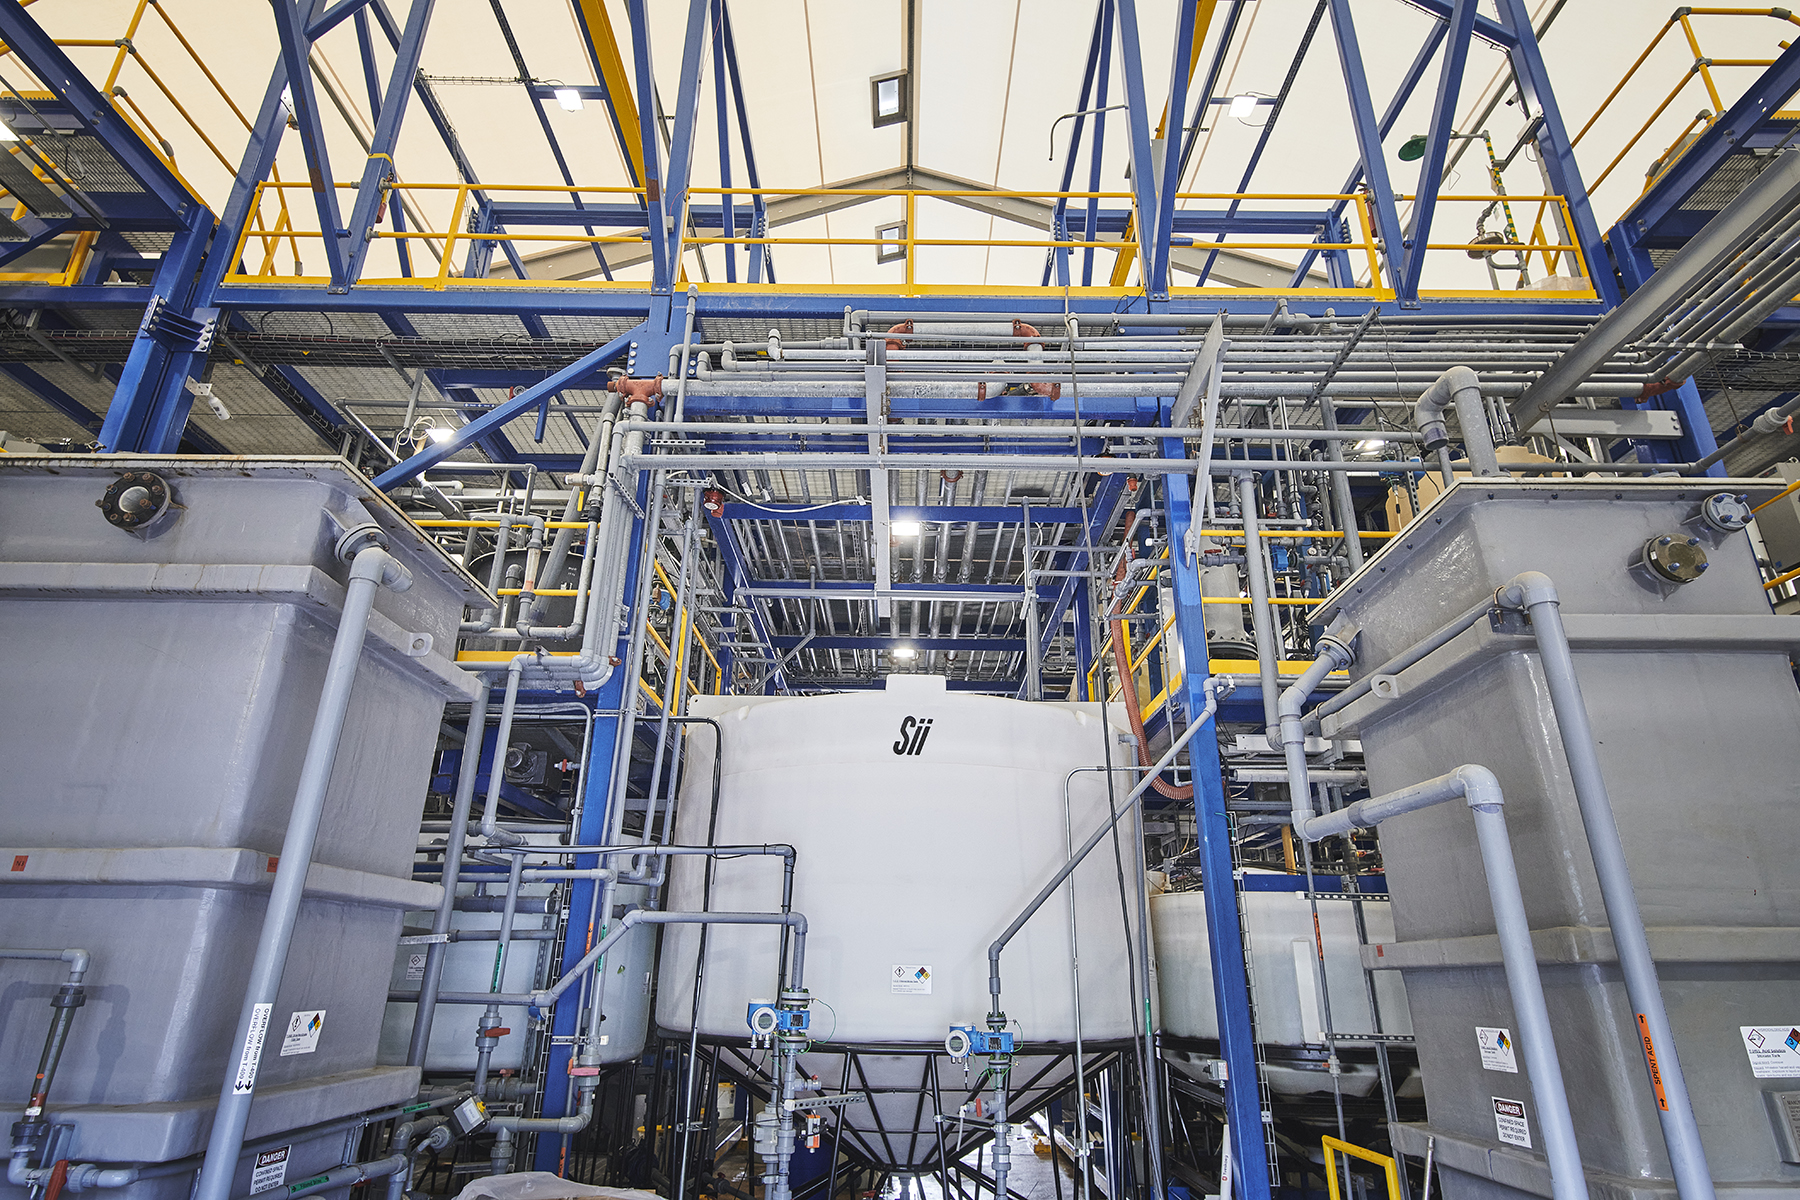 The interior of Standard Lithium’s direct lithium extraction demonstration facility in southern Arkansas. (Image courtesy of Standard Lithium Ltd.)